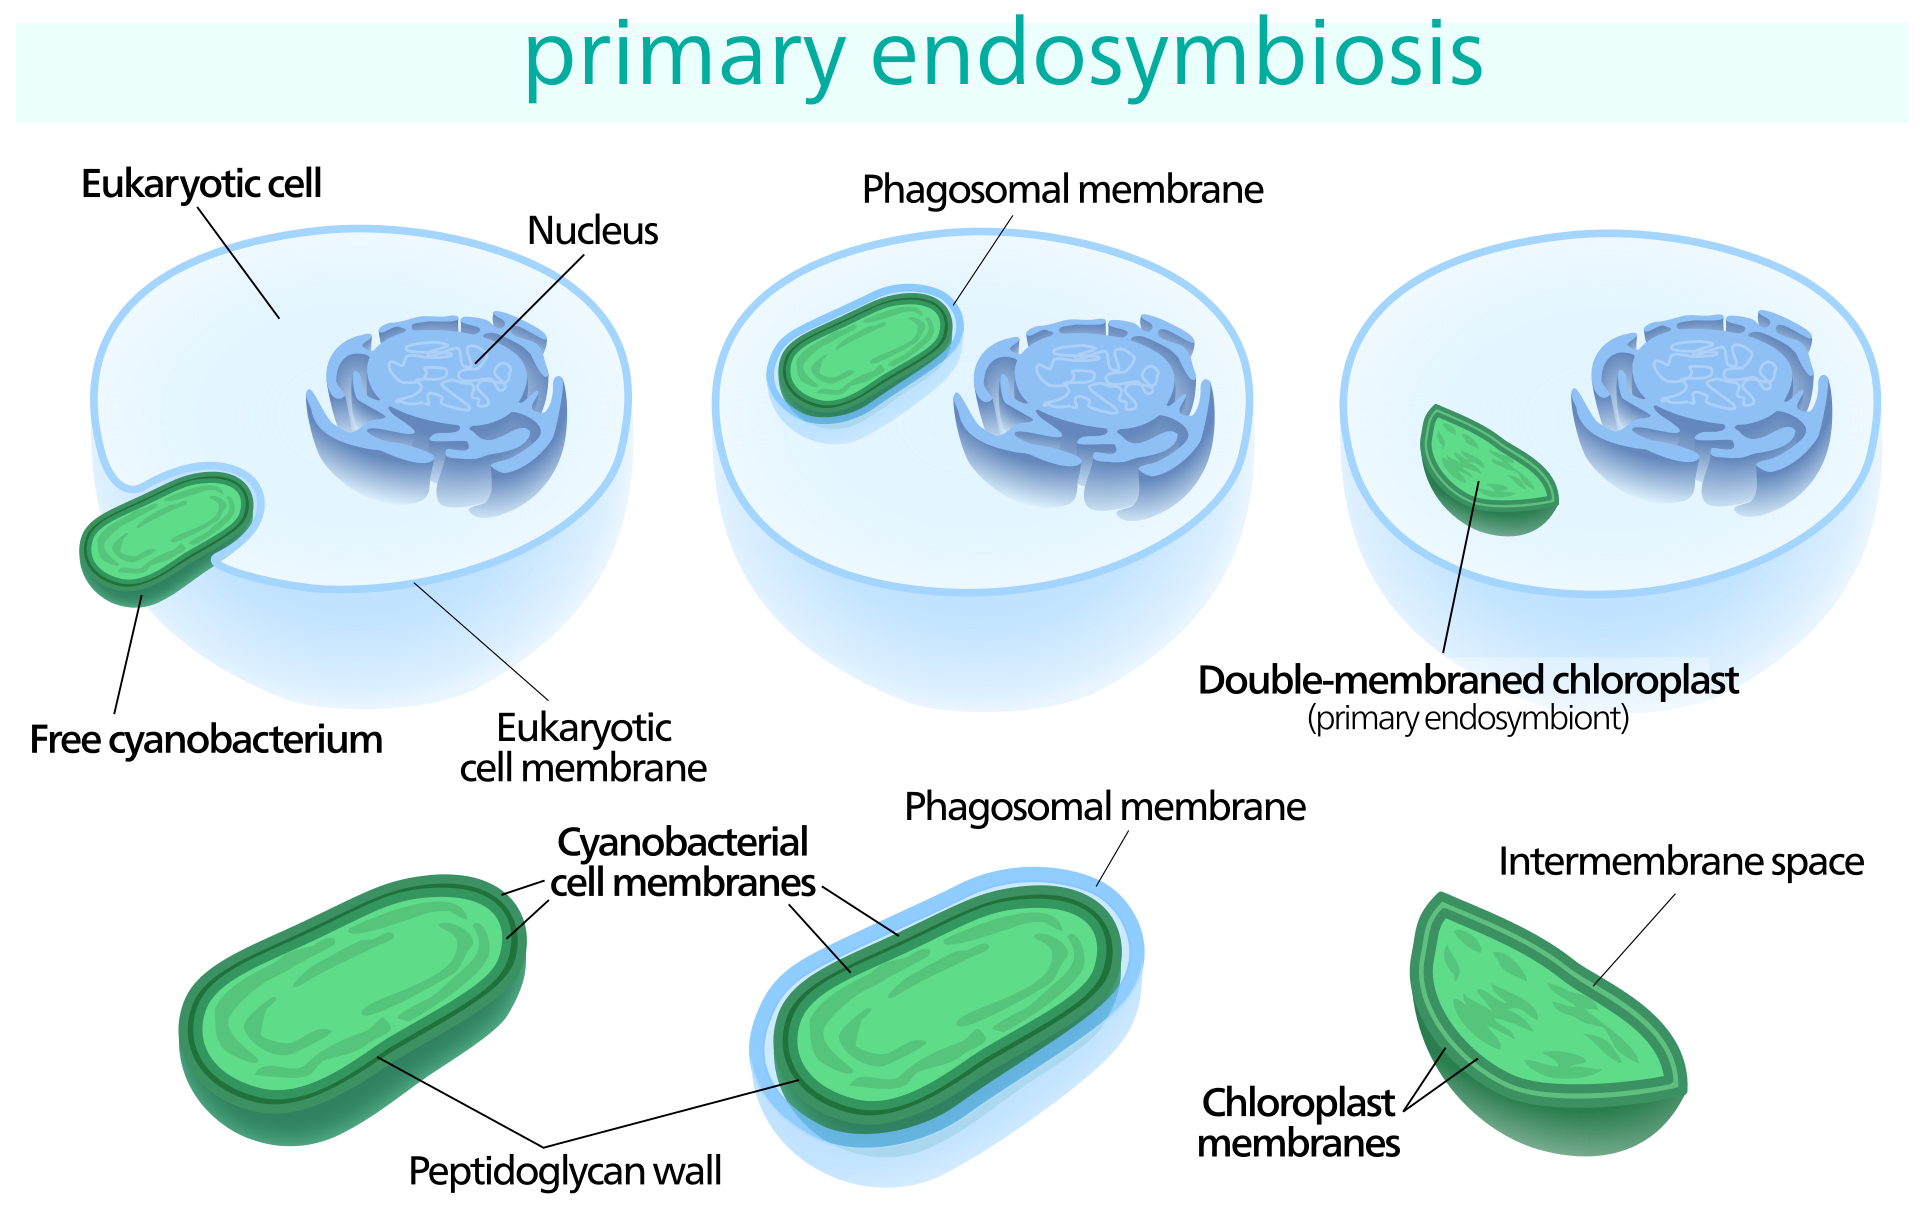 A small green cell is engulfed by a larger blue cell with a nucleus, eventually becoming a chloroplast.